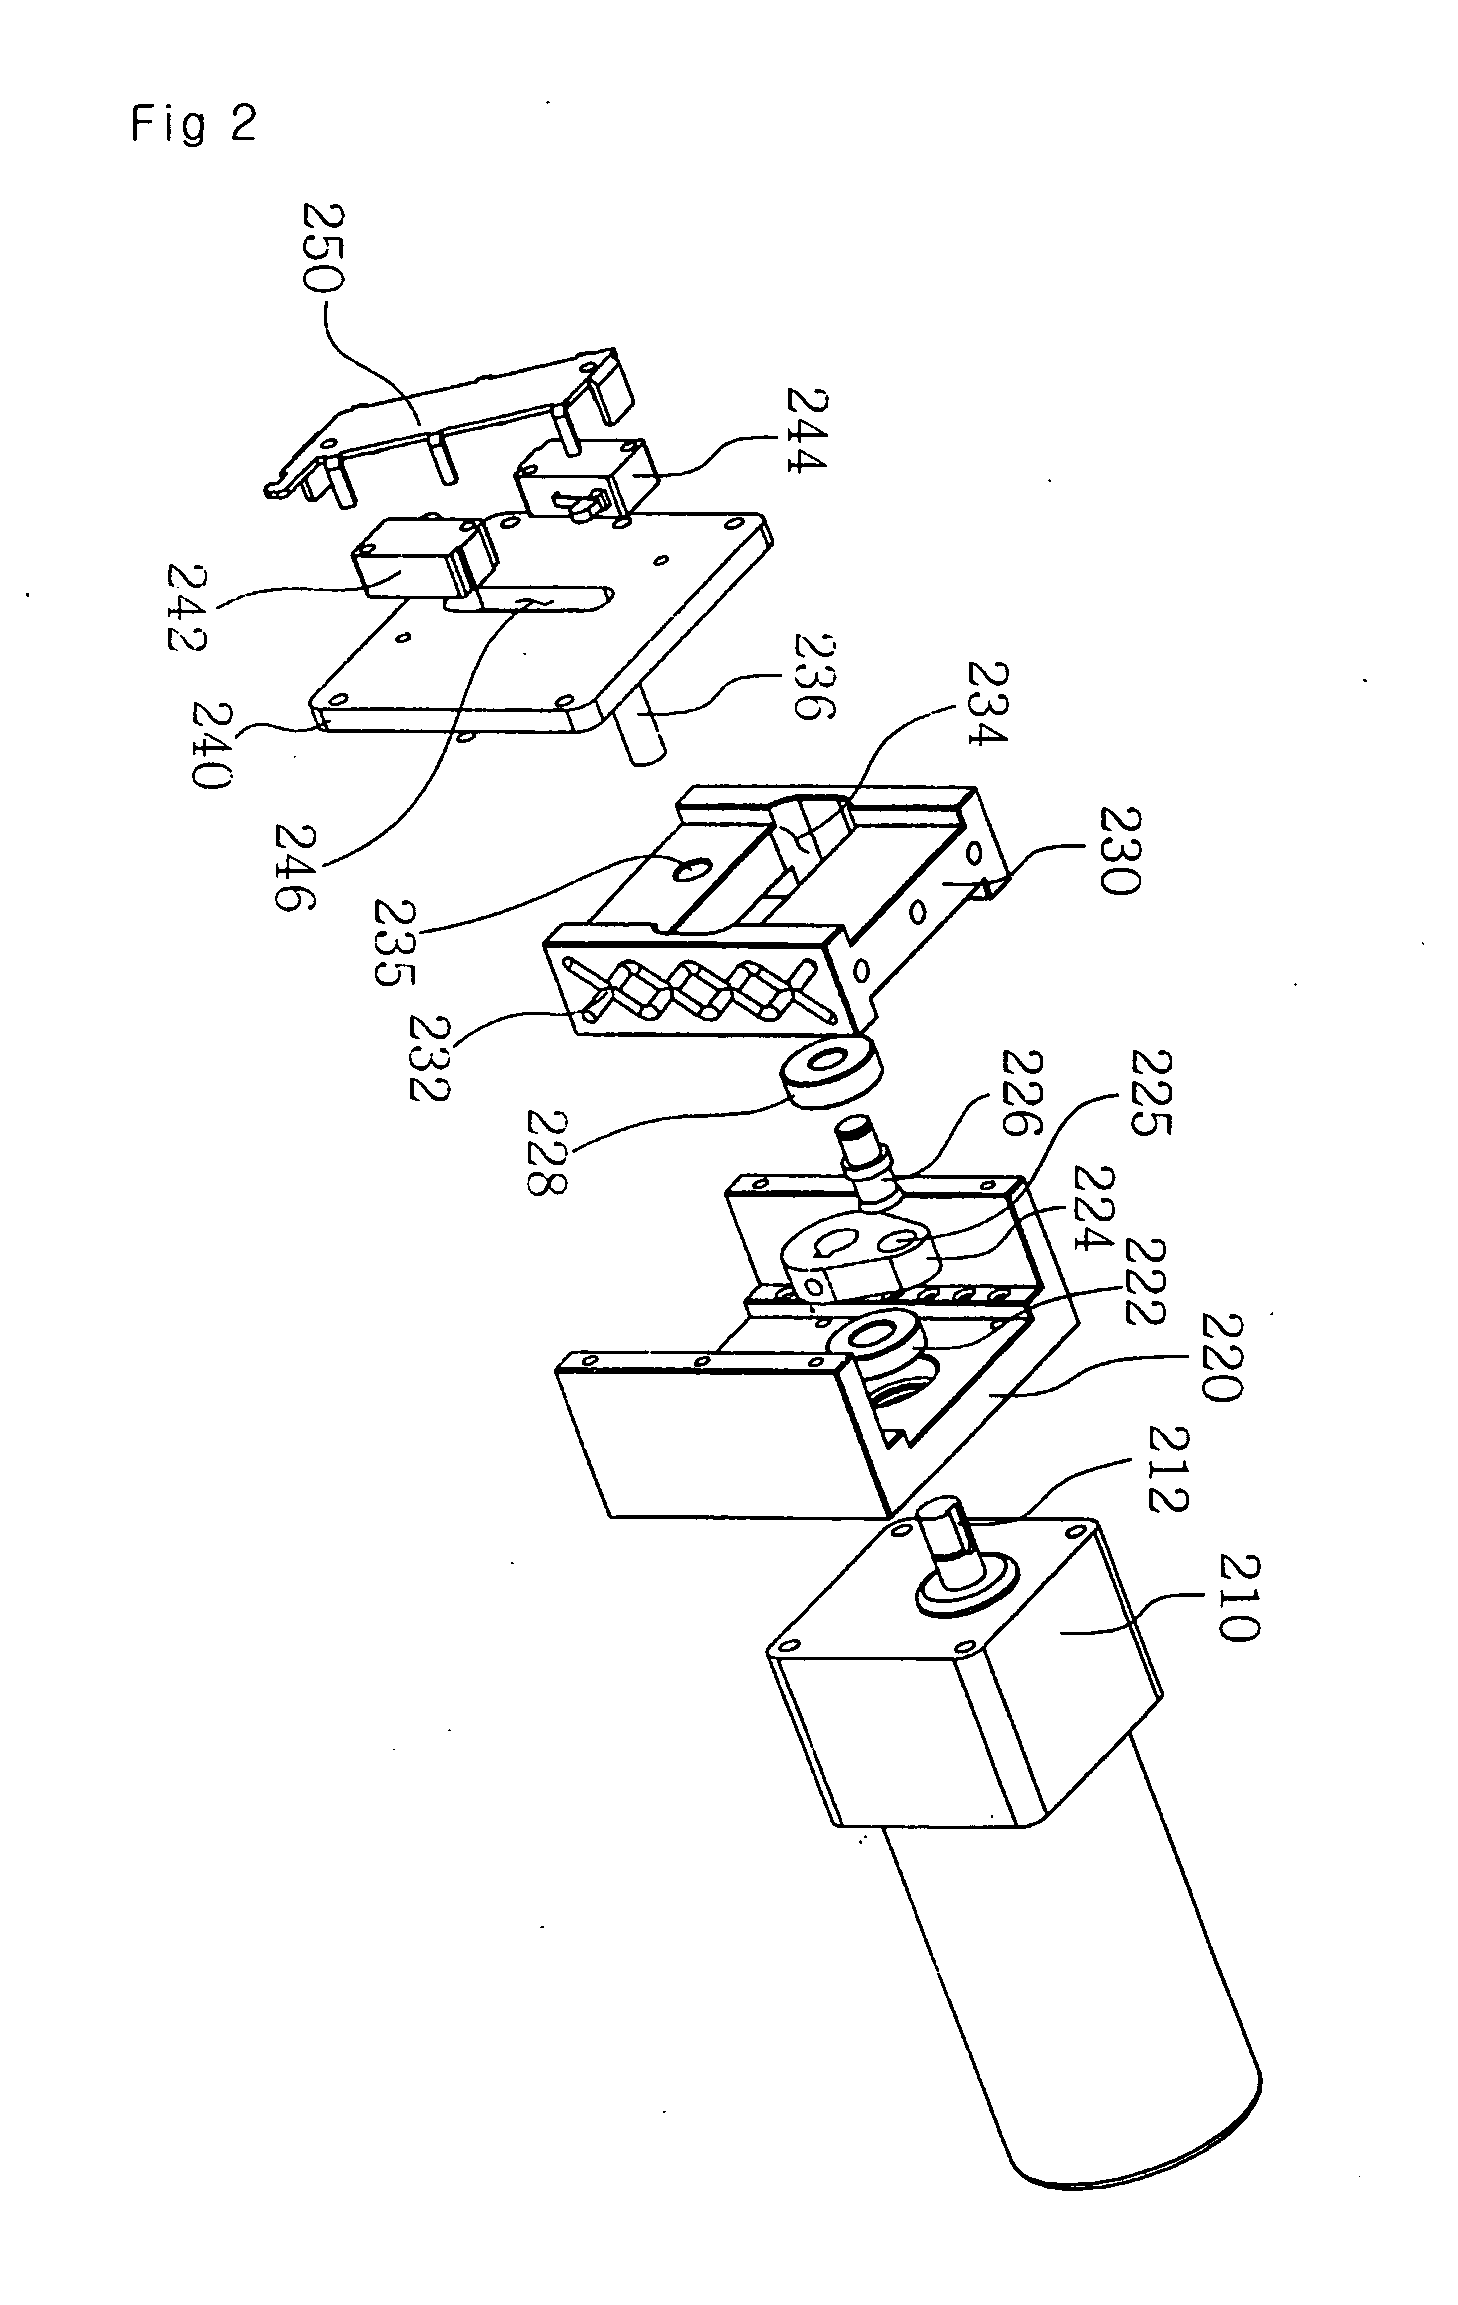 Thermoceramic lifter of thermotherapy apparatus